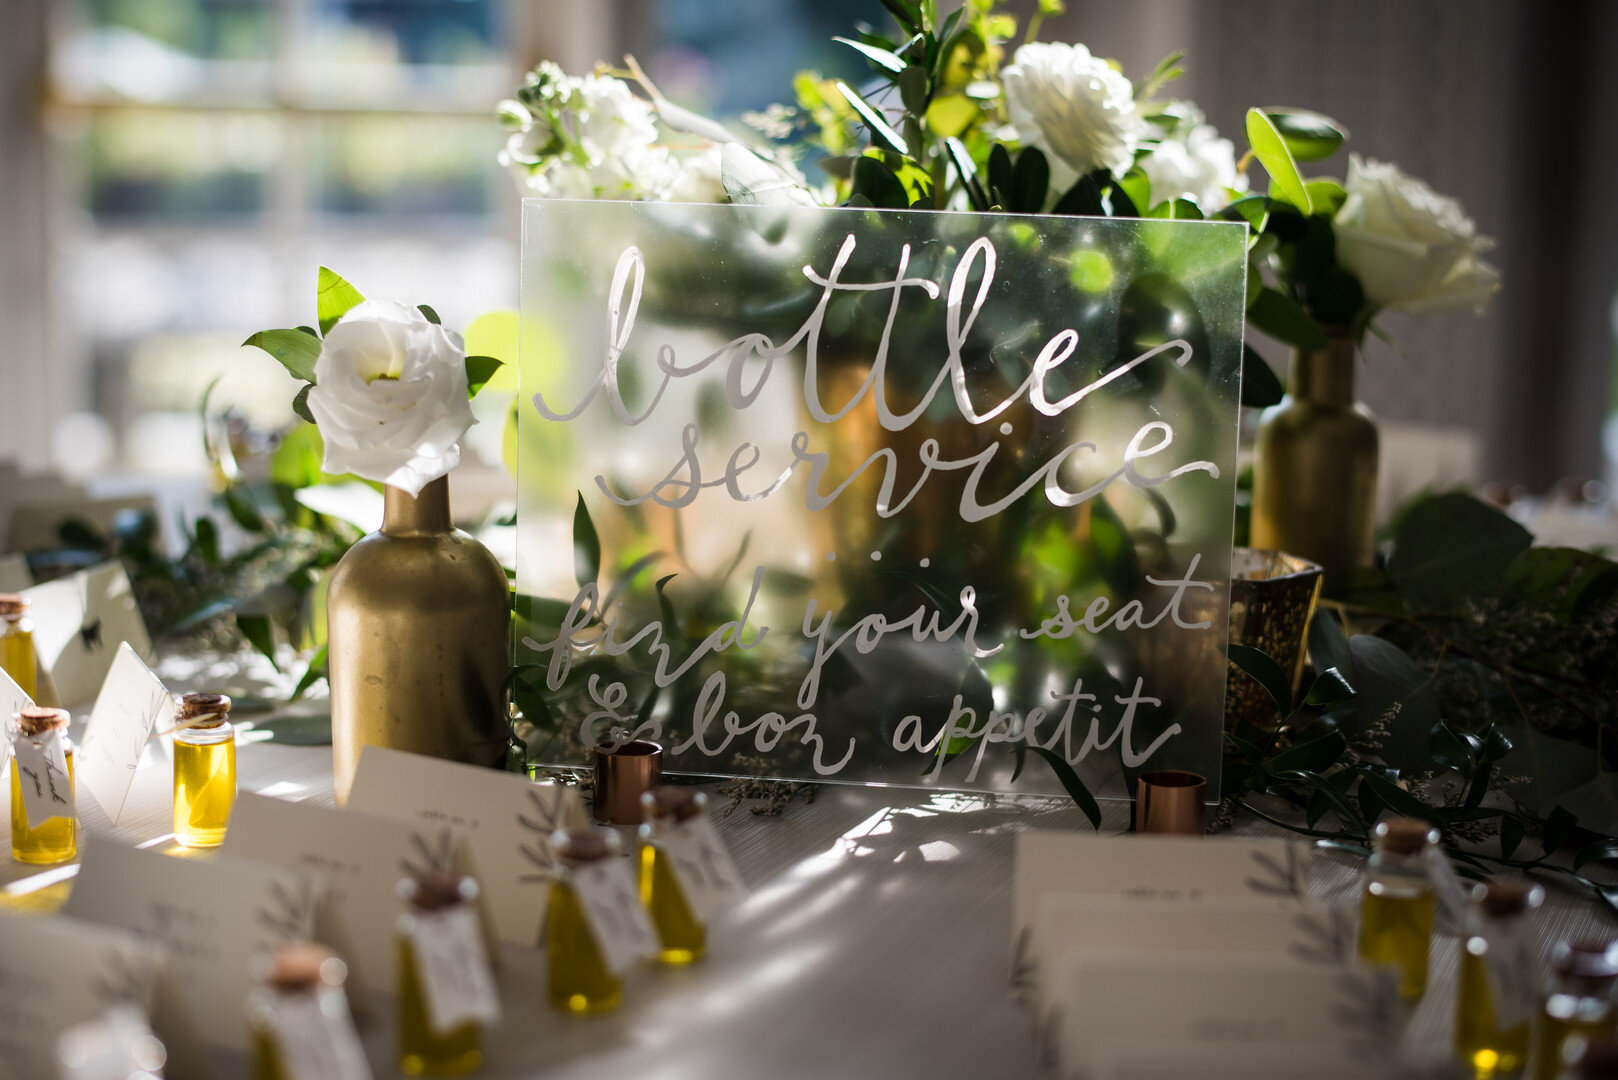 Wedding Escort Table Sign: Golden Hour Armour House Chicago Wedding captured by Inspired Eye Photography featured on CHI thee WED. Find more wedding ideas at CHItheeWED.com!